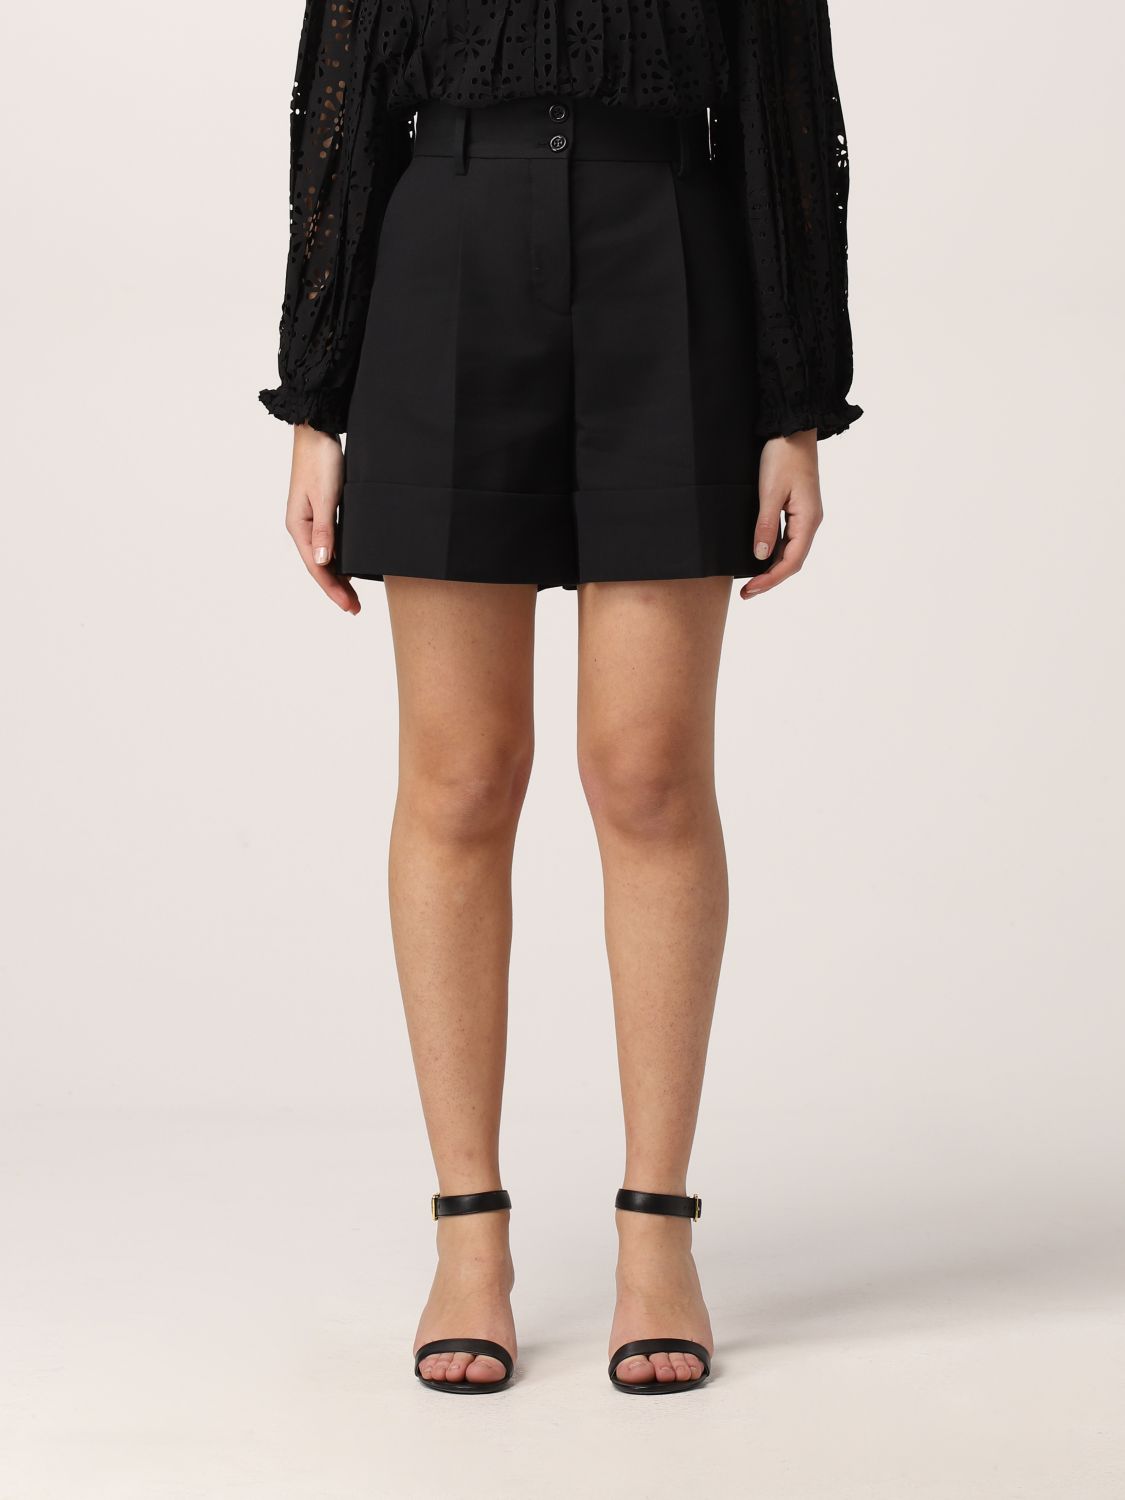 SEE BY CHLOÉ: shorts in cotton blend - Black | See By Chloé short ...